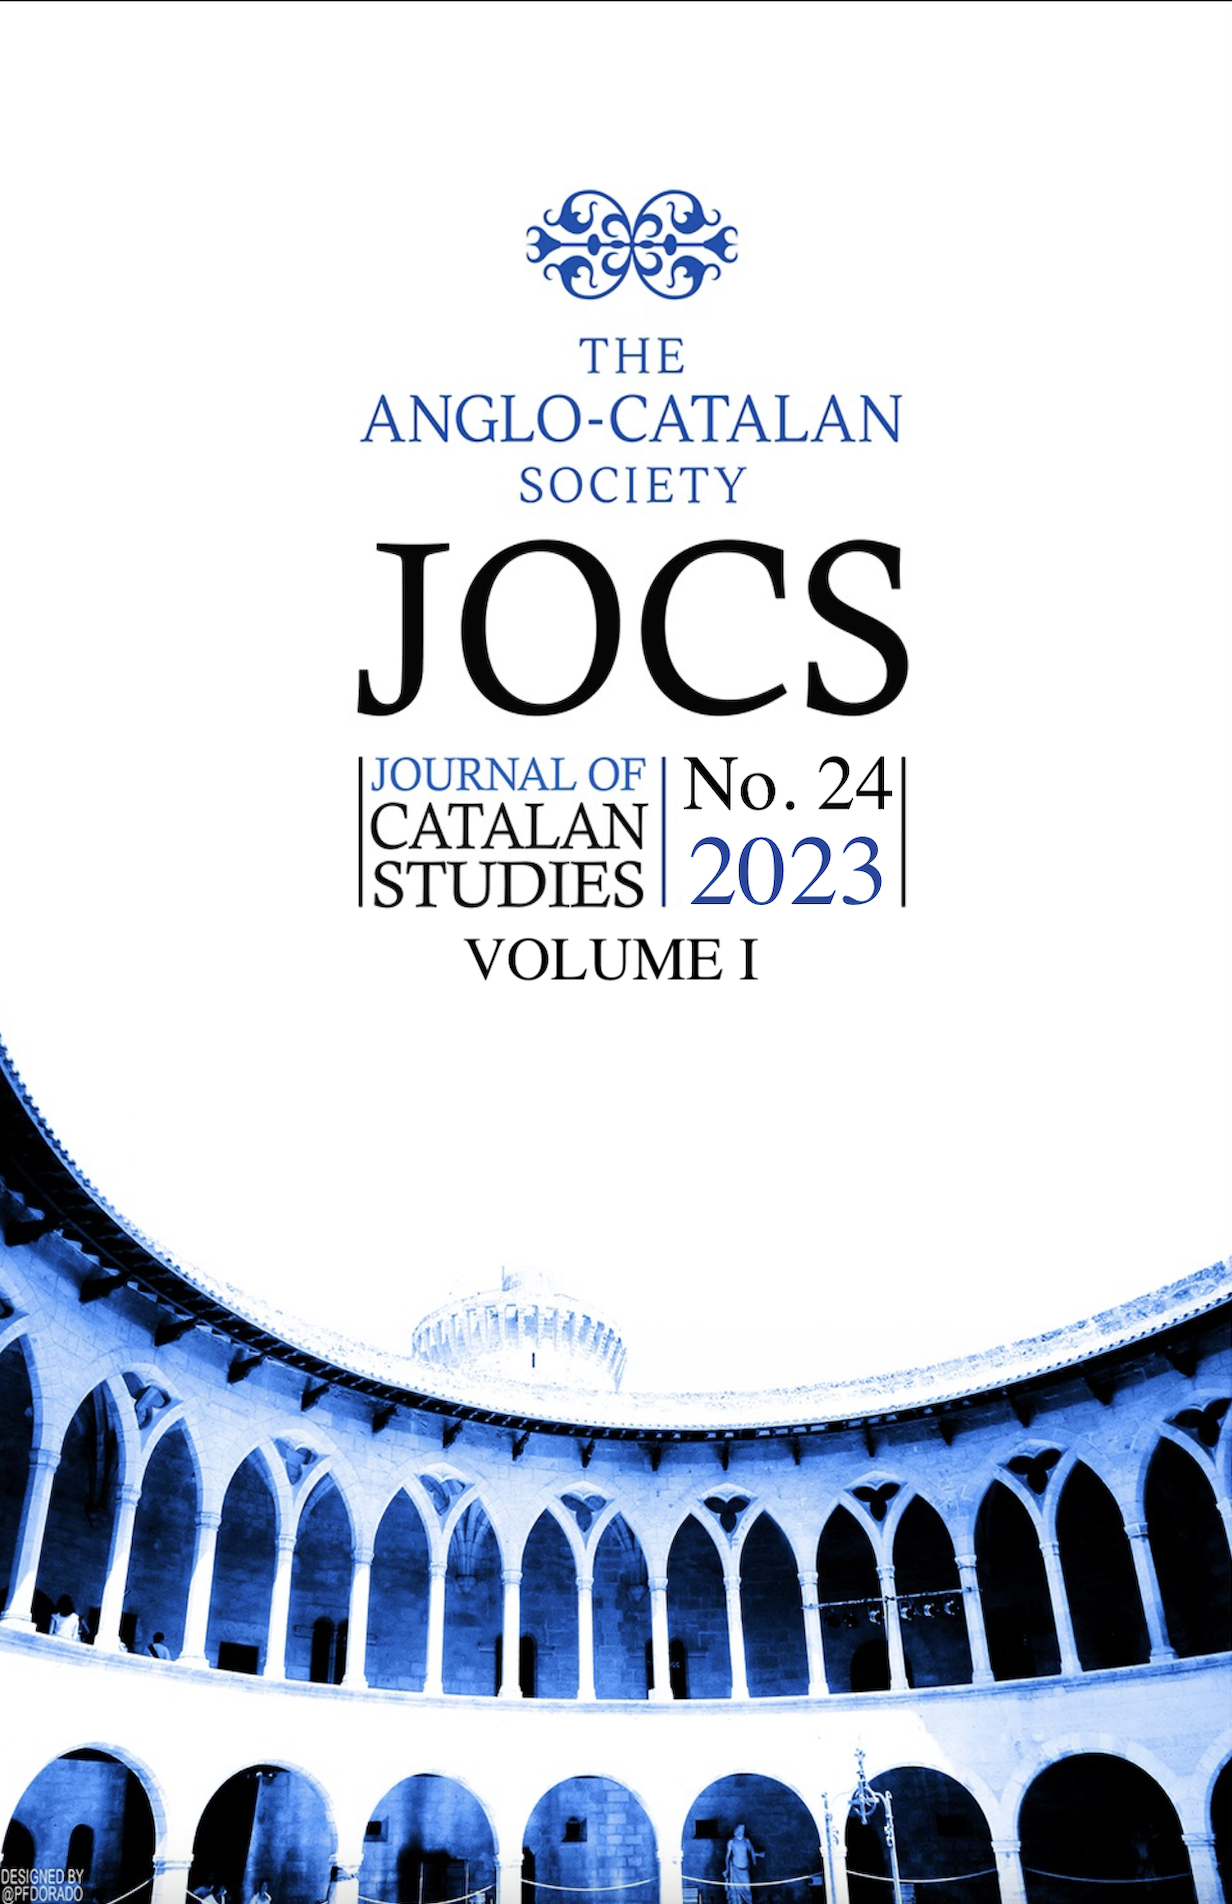 Anglo-Catalan Society logo over the letters JOCS and the words "Journal of" (in blue) "Catalan Studies" (in black). No 24. 2023 Volume I. The backdrop is an interior image of Bellver Castle in Palma de Mallorca: a series of arches in blue negative